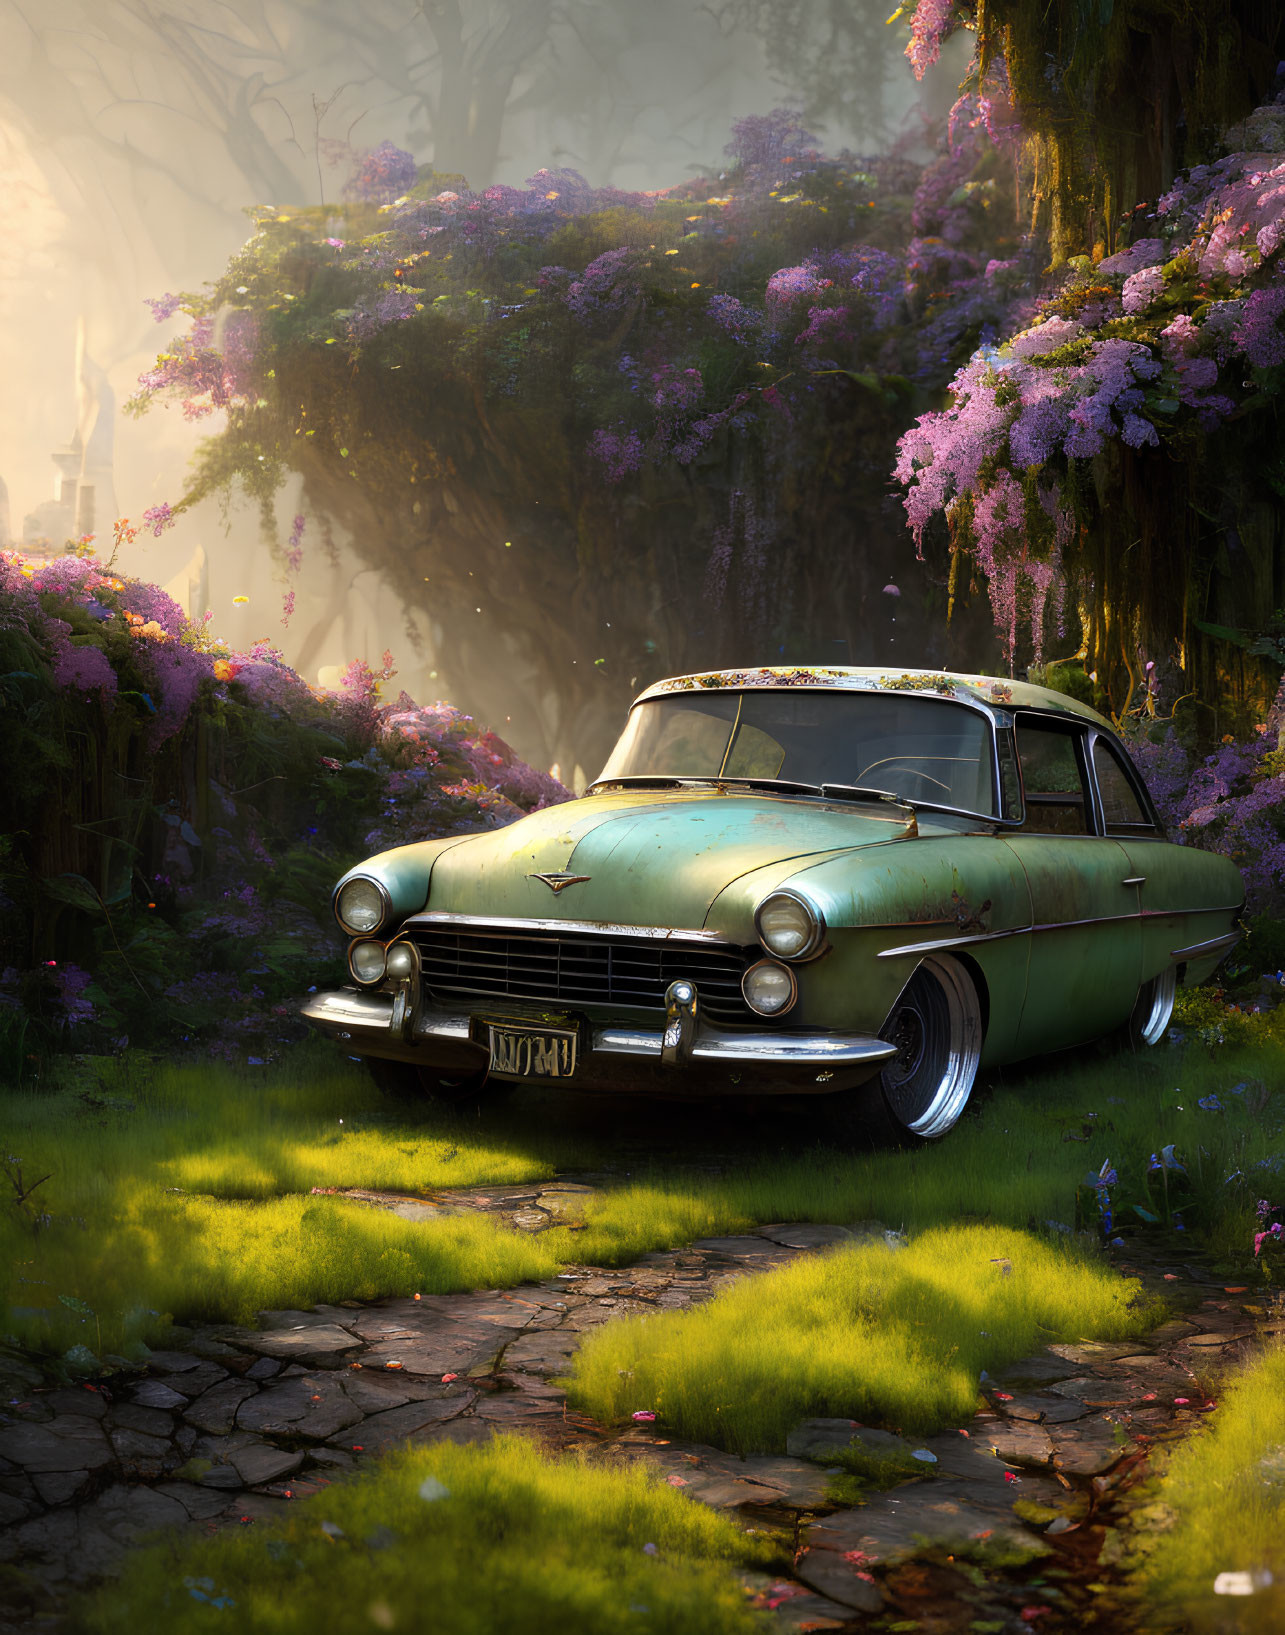 Classic Car Beneath Blooming Wisteria in Forest Clearing